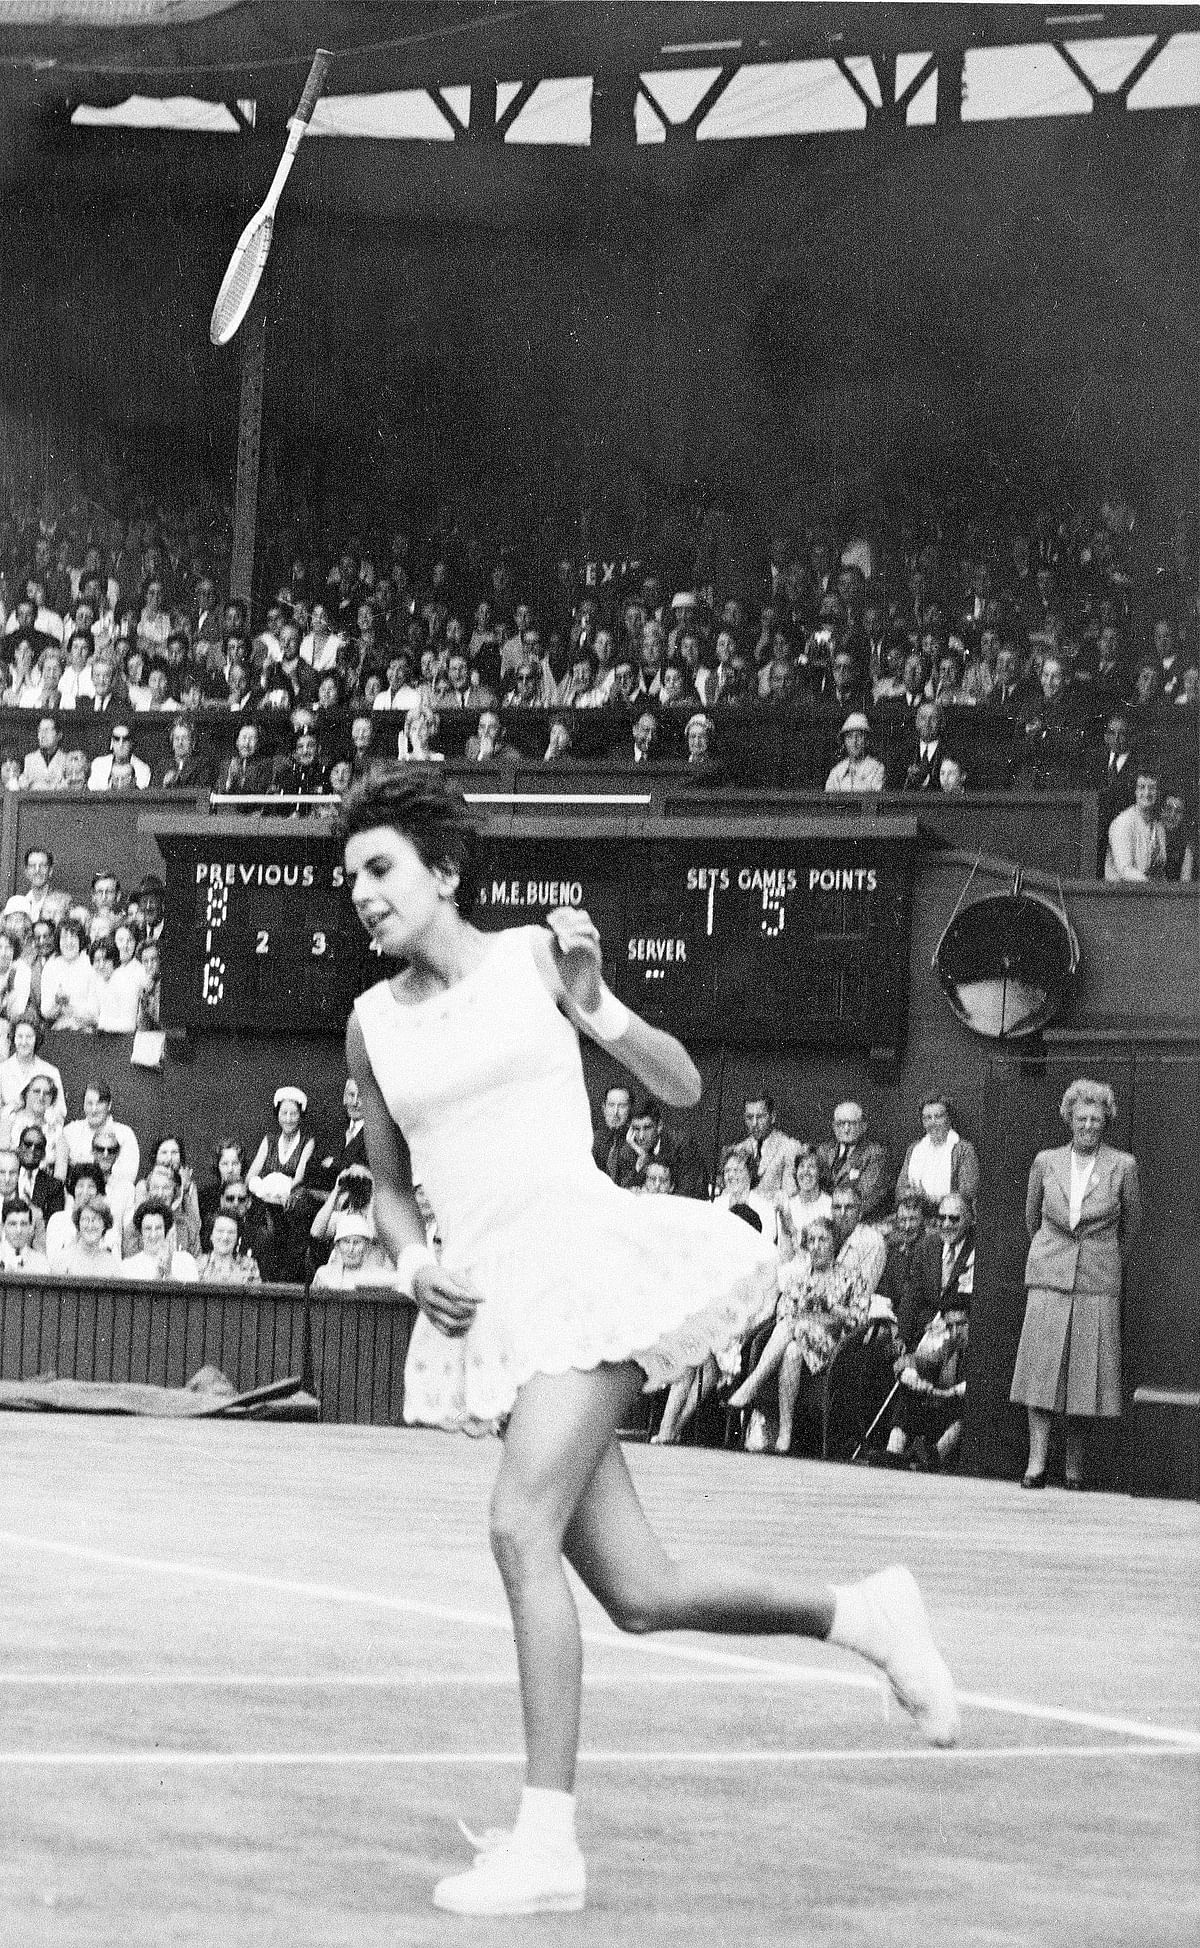 From 31-time Grand Slam Champion Helen Wills Moody, to Steffi Graf to Serena Williams - pictures of Wimbledon’s best.